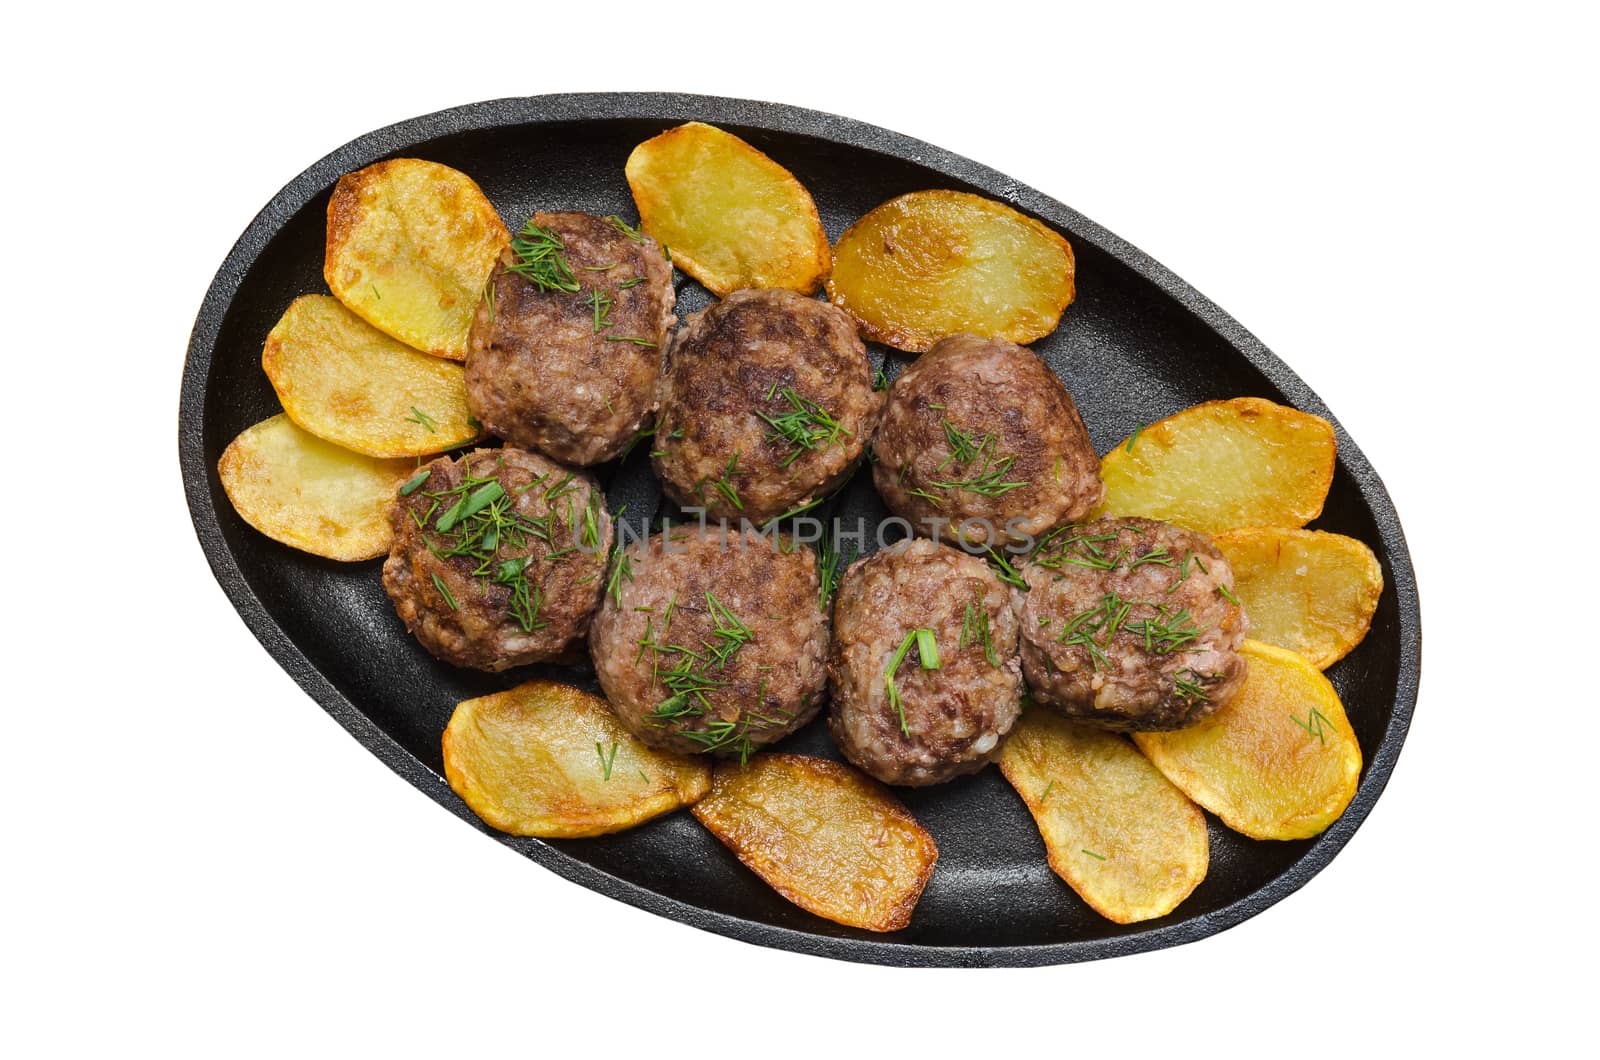 Fried meatballs with rice and French fries, on a white background. by Gaina